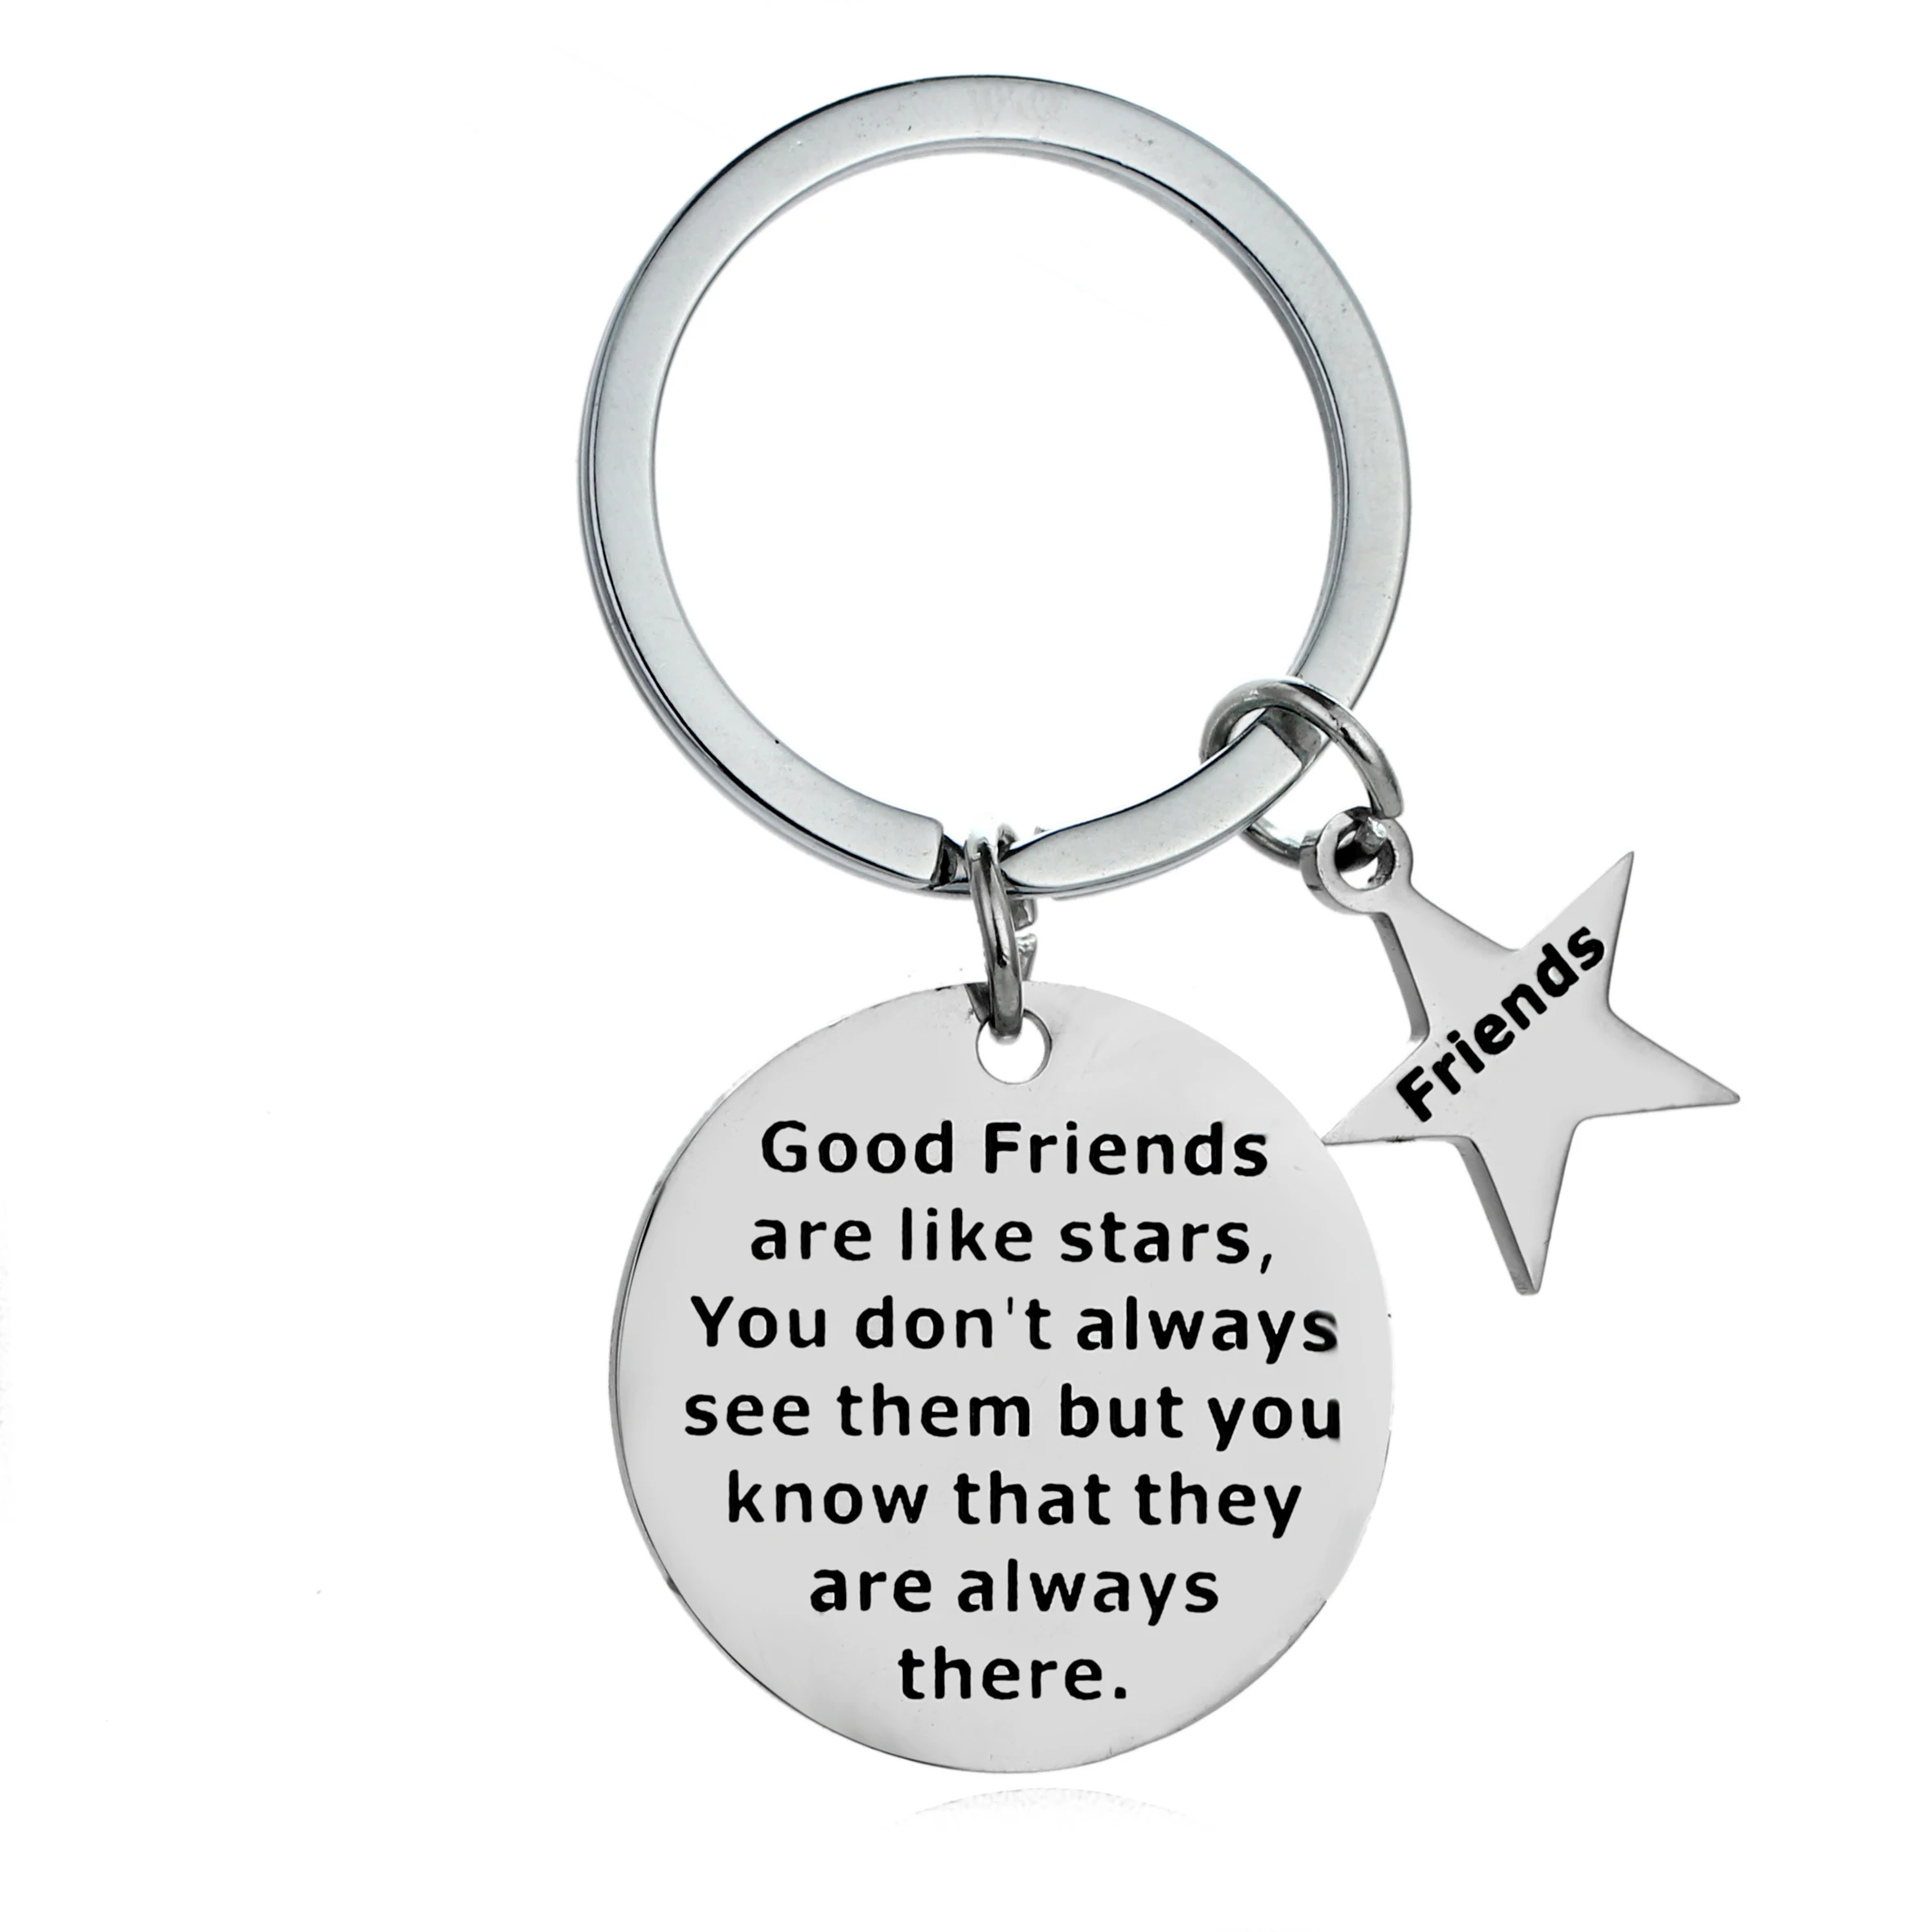 

36PCs Friendship Keyrings Good Friends Are Like Stars Round Pendant Keychains Stars Friends Stainless Steel Charm Key Rings Hot